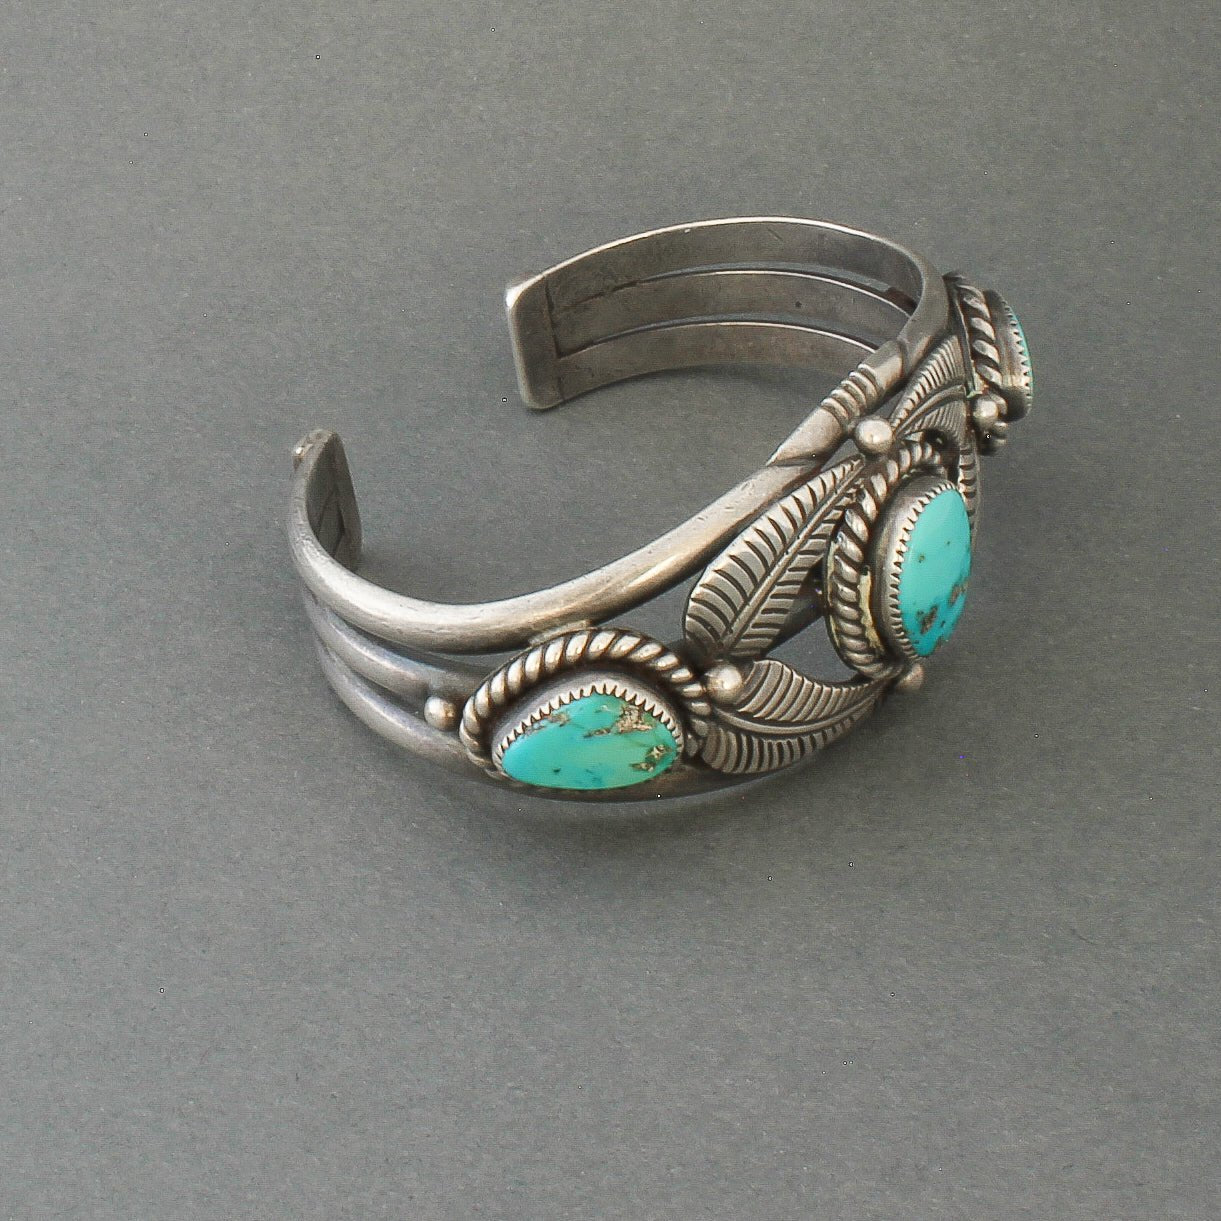 Vintage Bracelet By McKee Platero Of Turquoise and Silver - Turquoise & Tufa